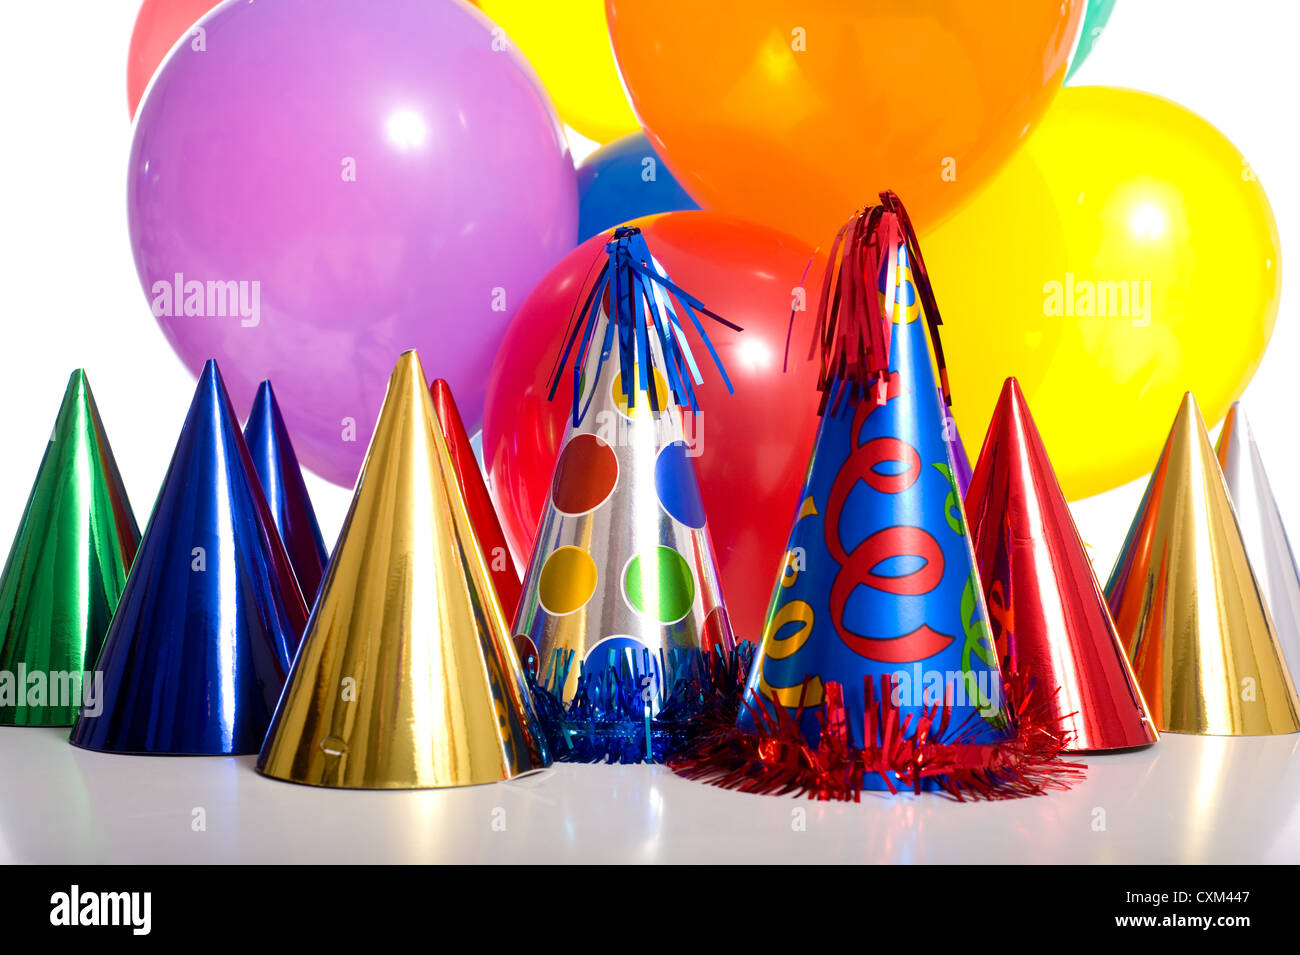 Birthday party background with party hats, floating balloons and streamers Stock Photo